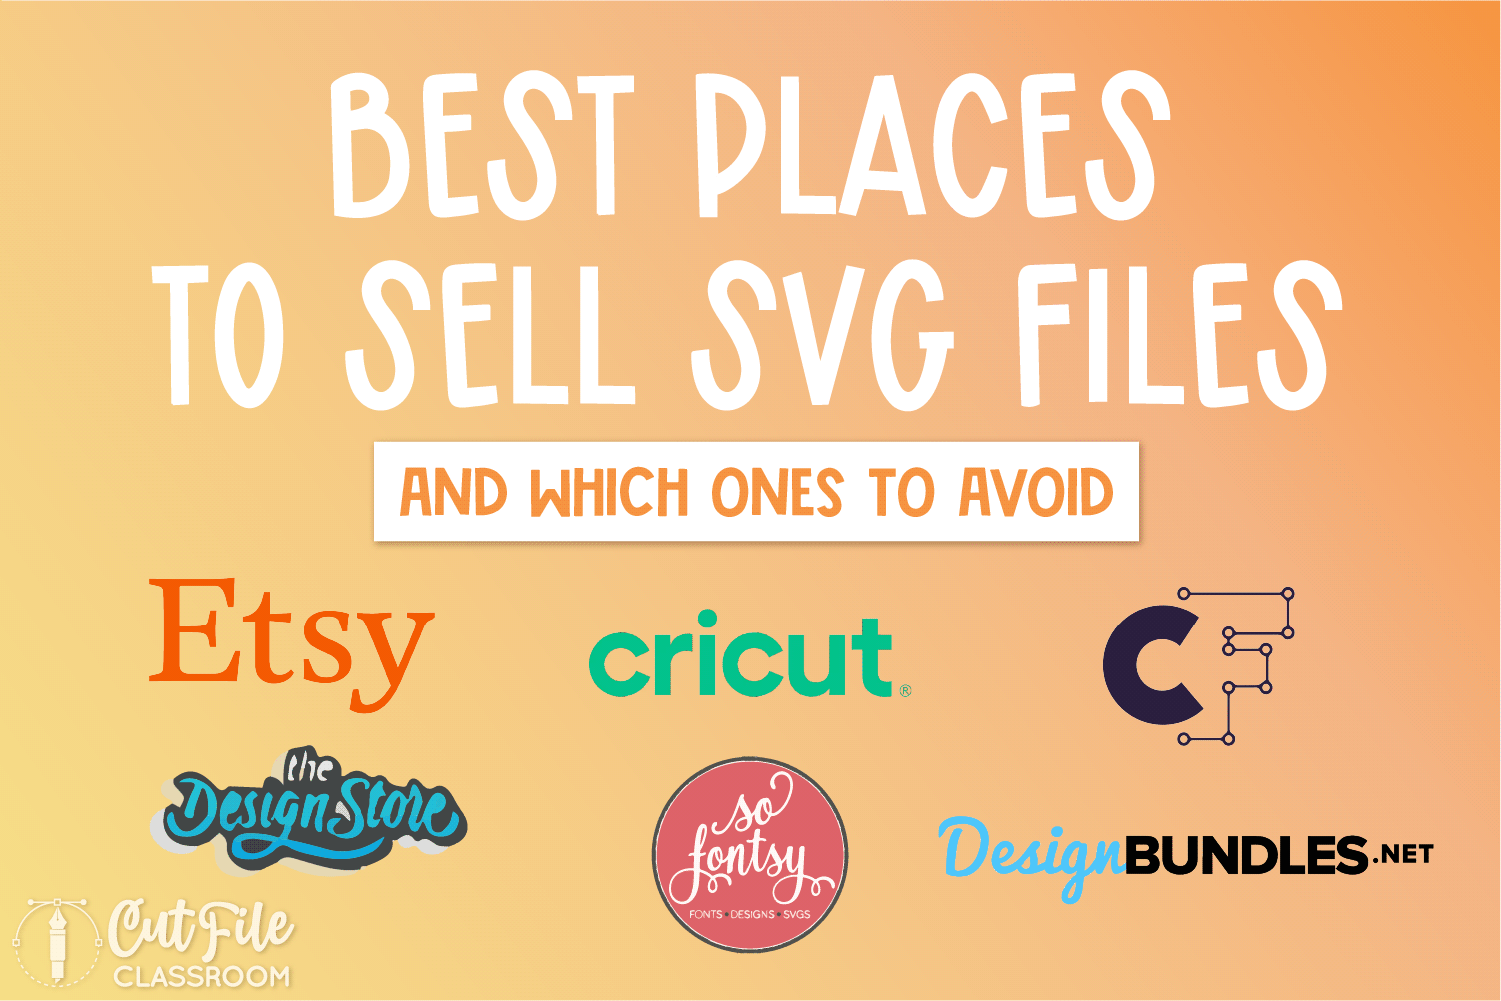 Best Places to Sell SVG Files